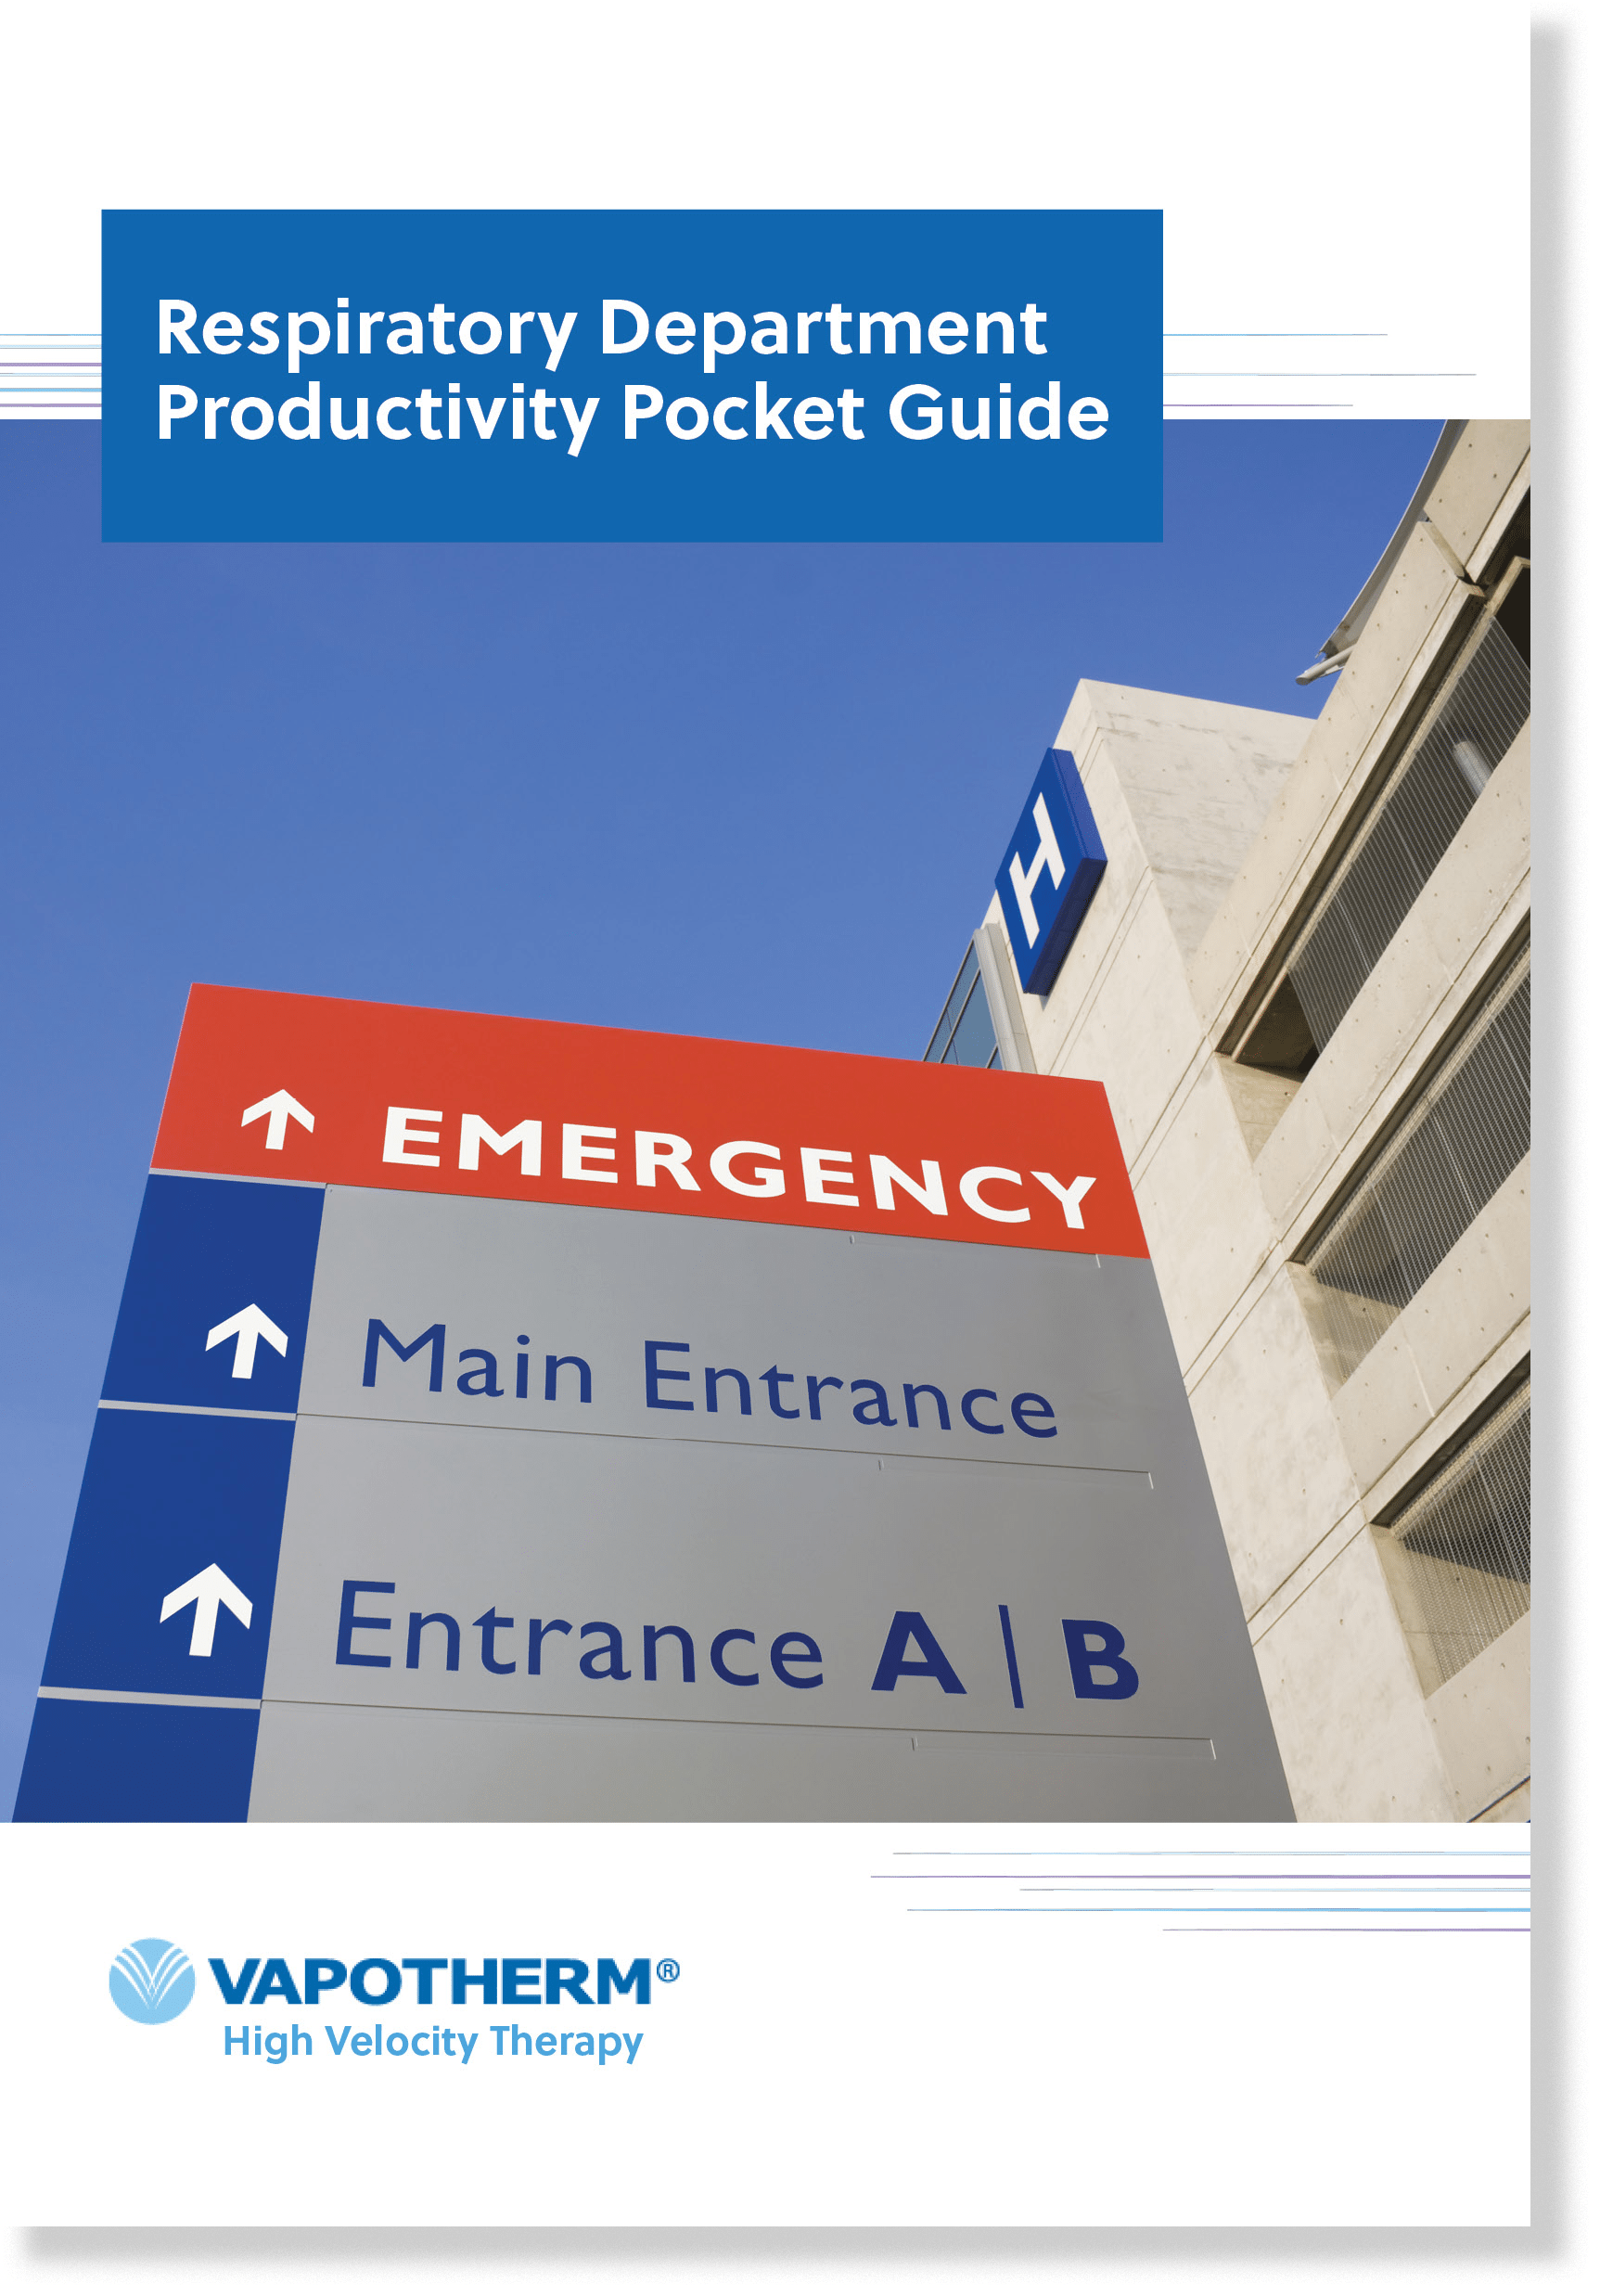 Image of an eBook cover titled “Respiratory Department Productivity Pocket Guide” with a picture of the outside of an emergency department.